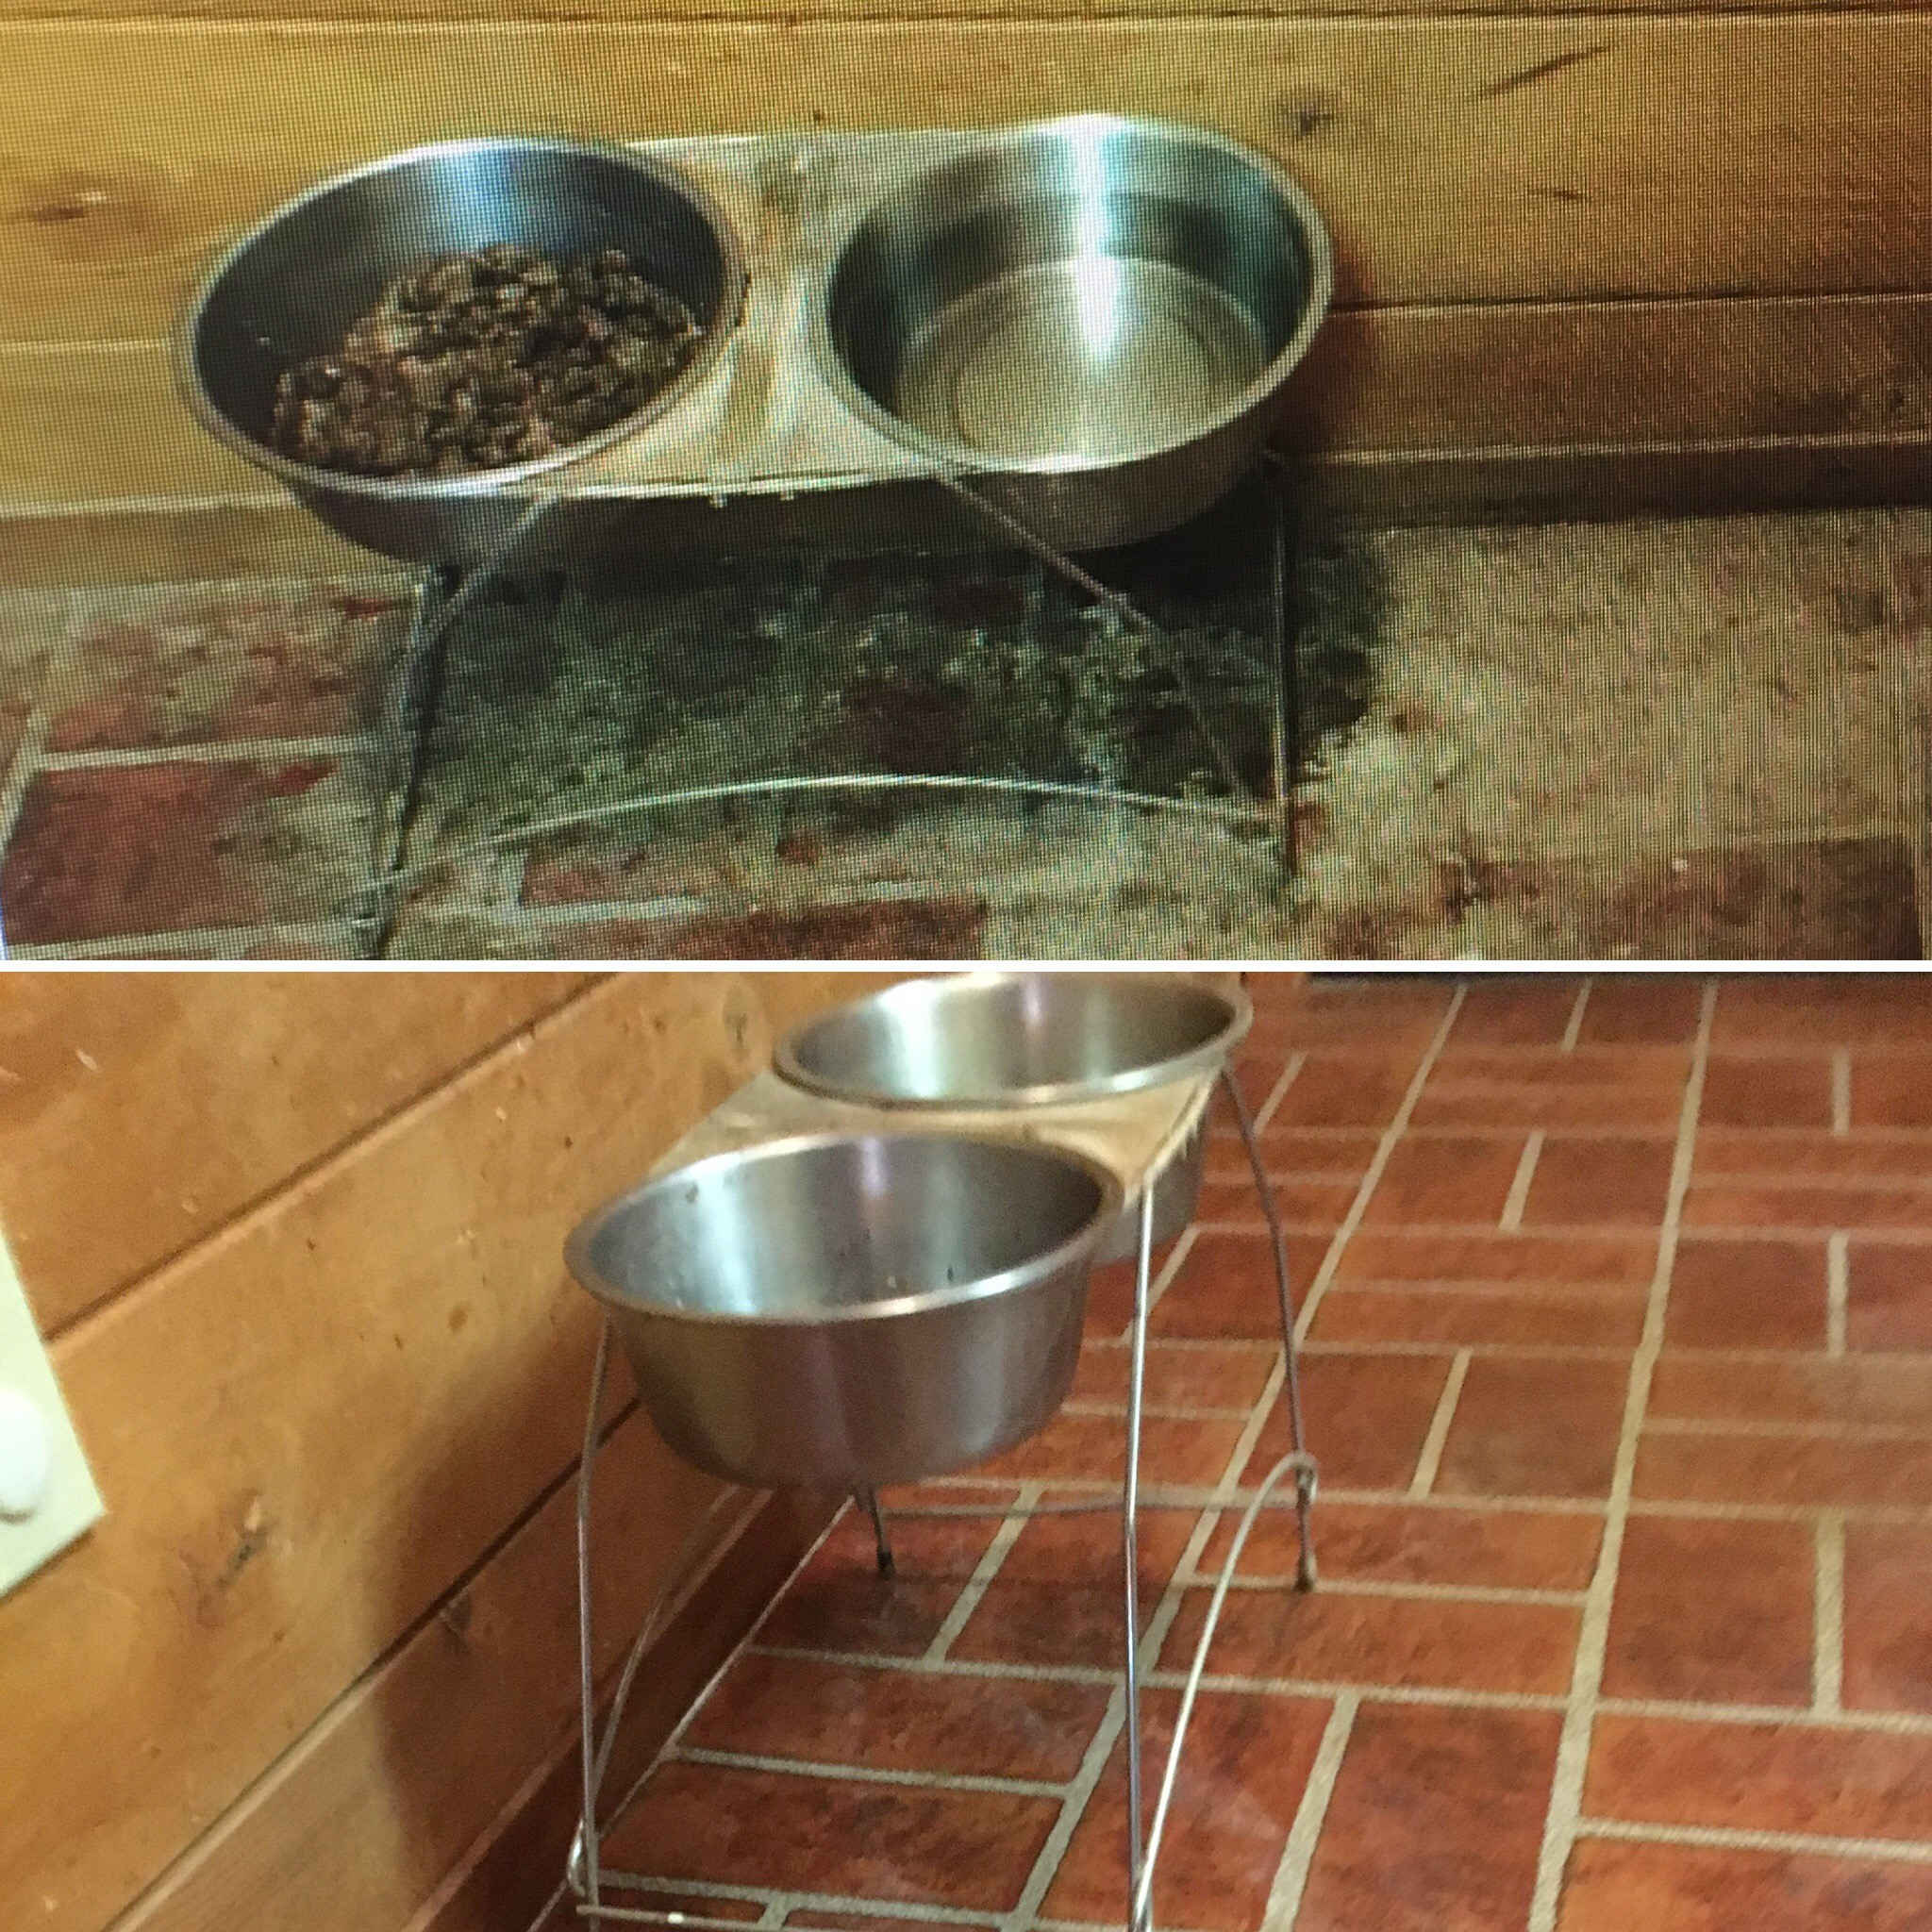 pet food area before and after cleaning